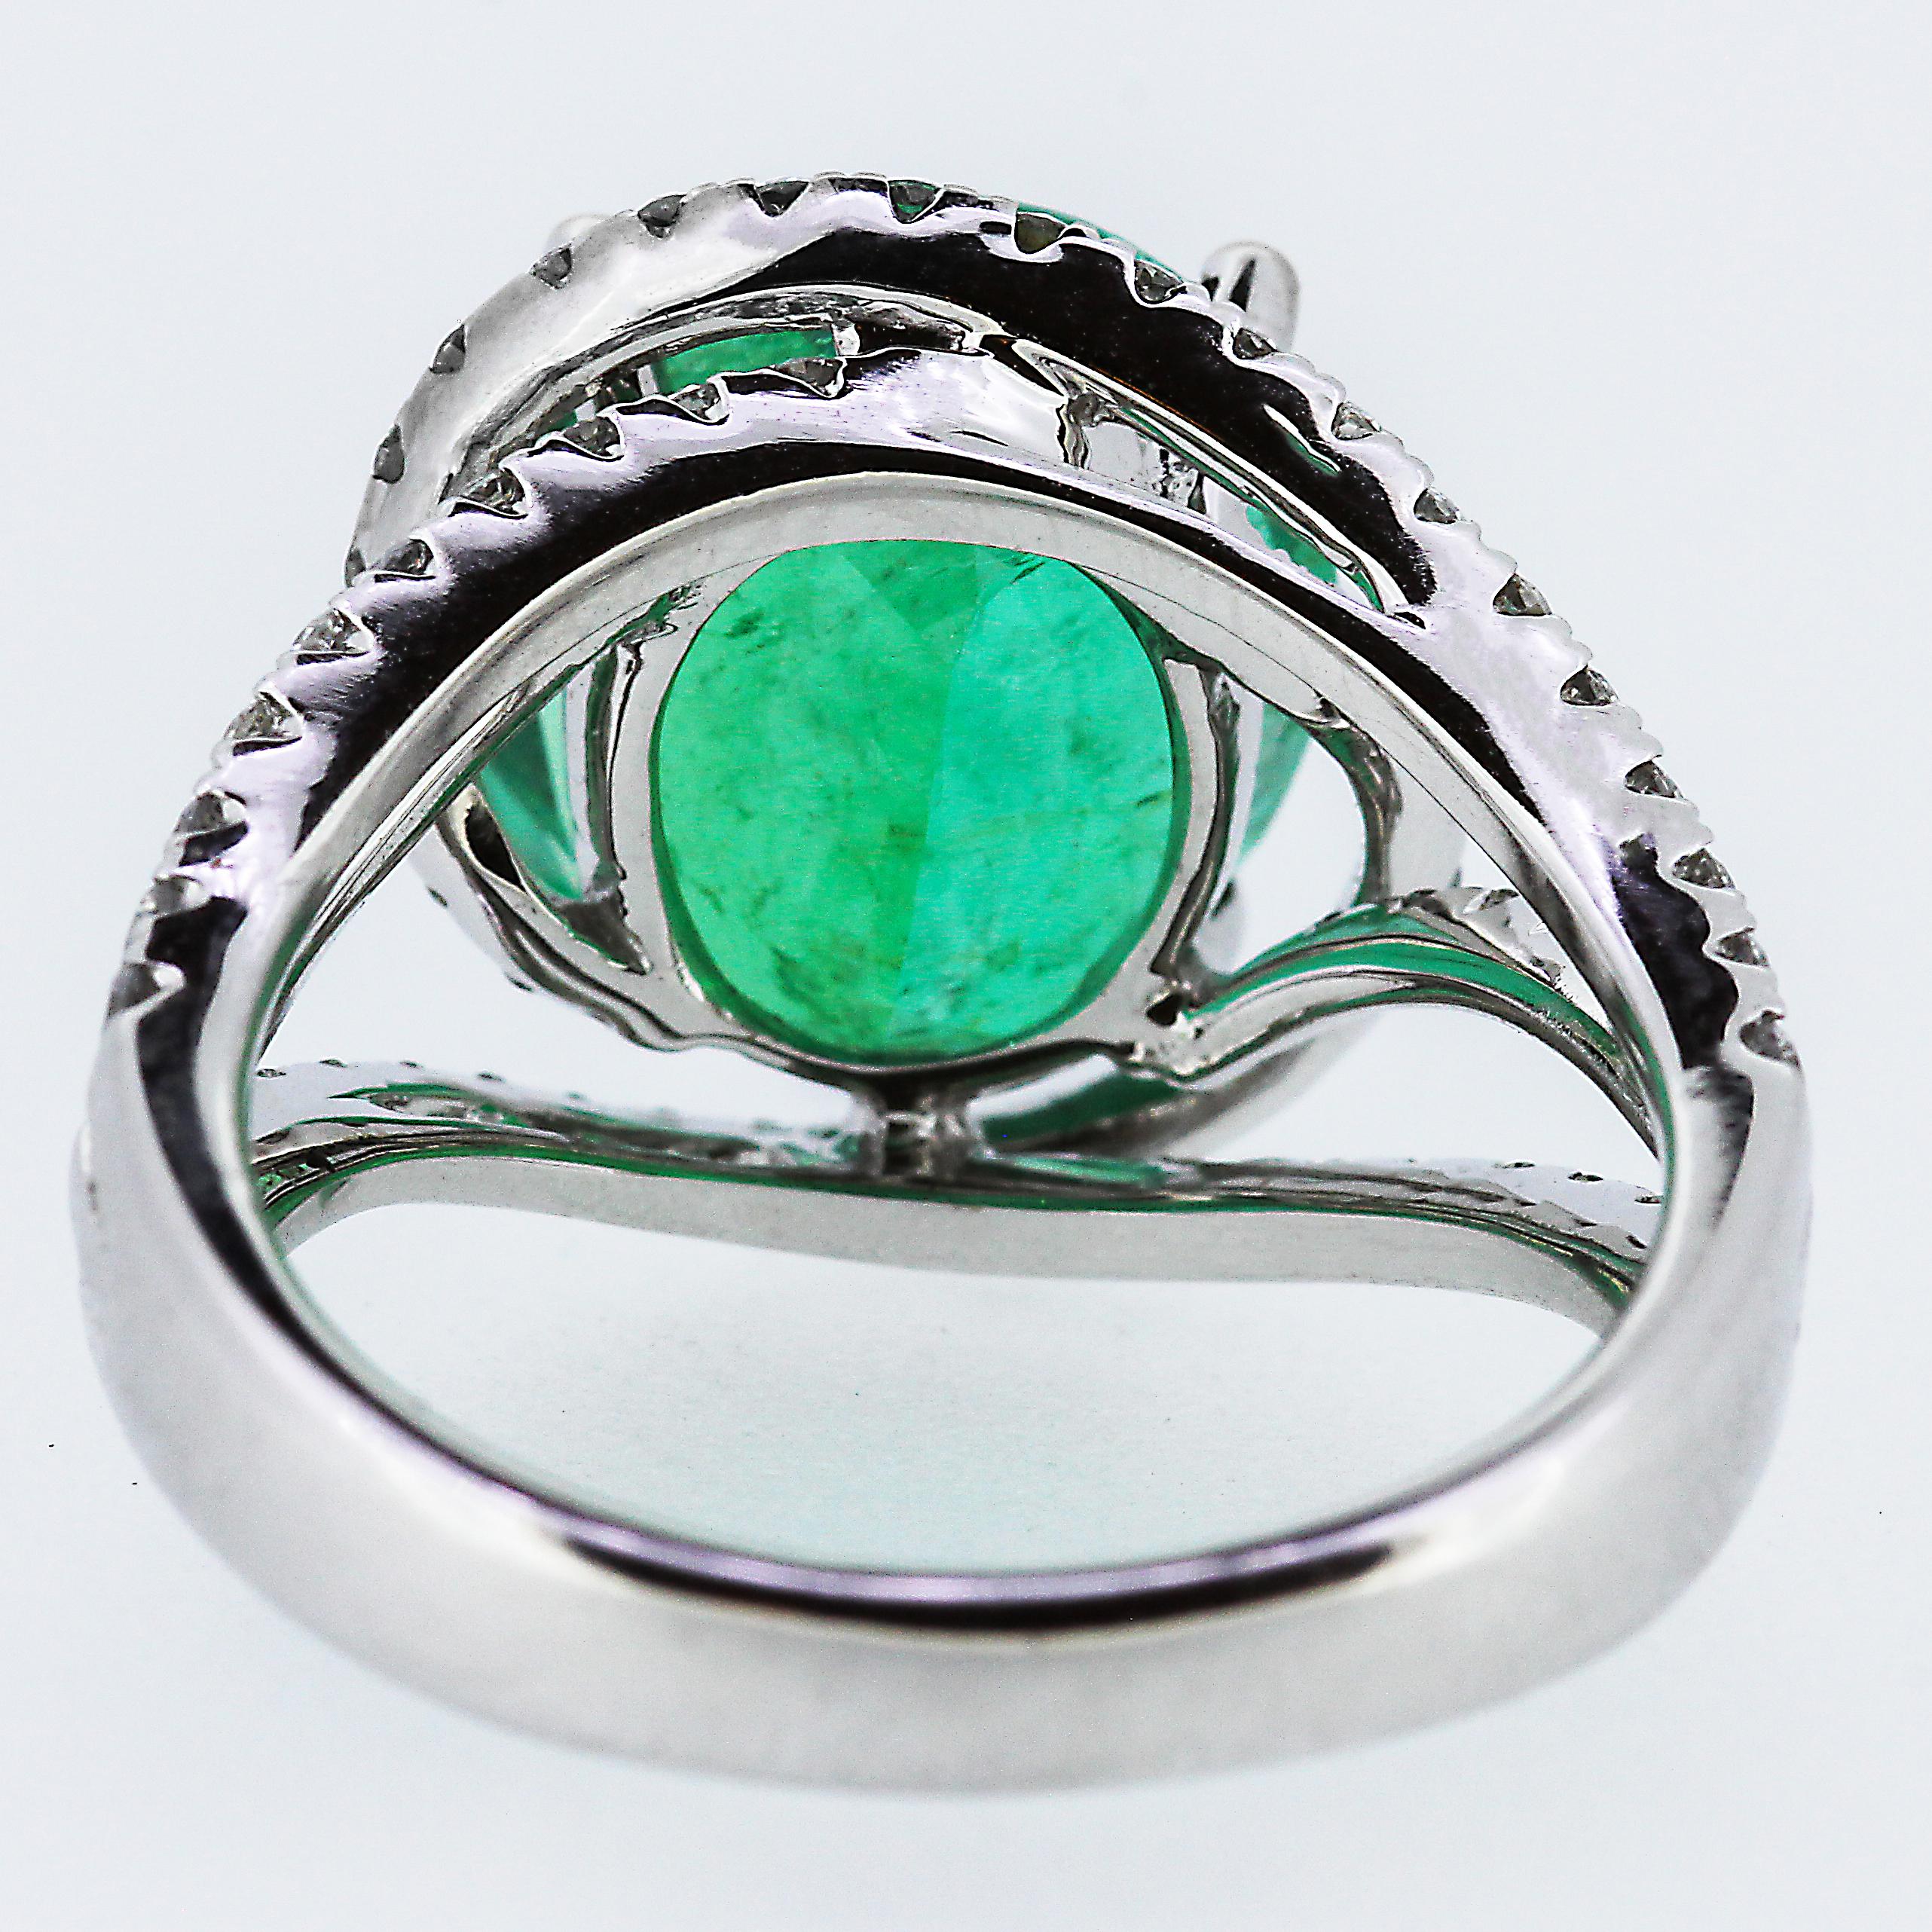 Contemporary Certificated Columbian Emerald 5.3 Carat and Diamond Ring in 18 Carat White Gold